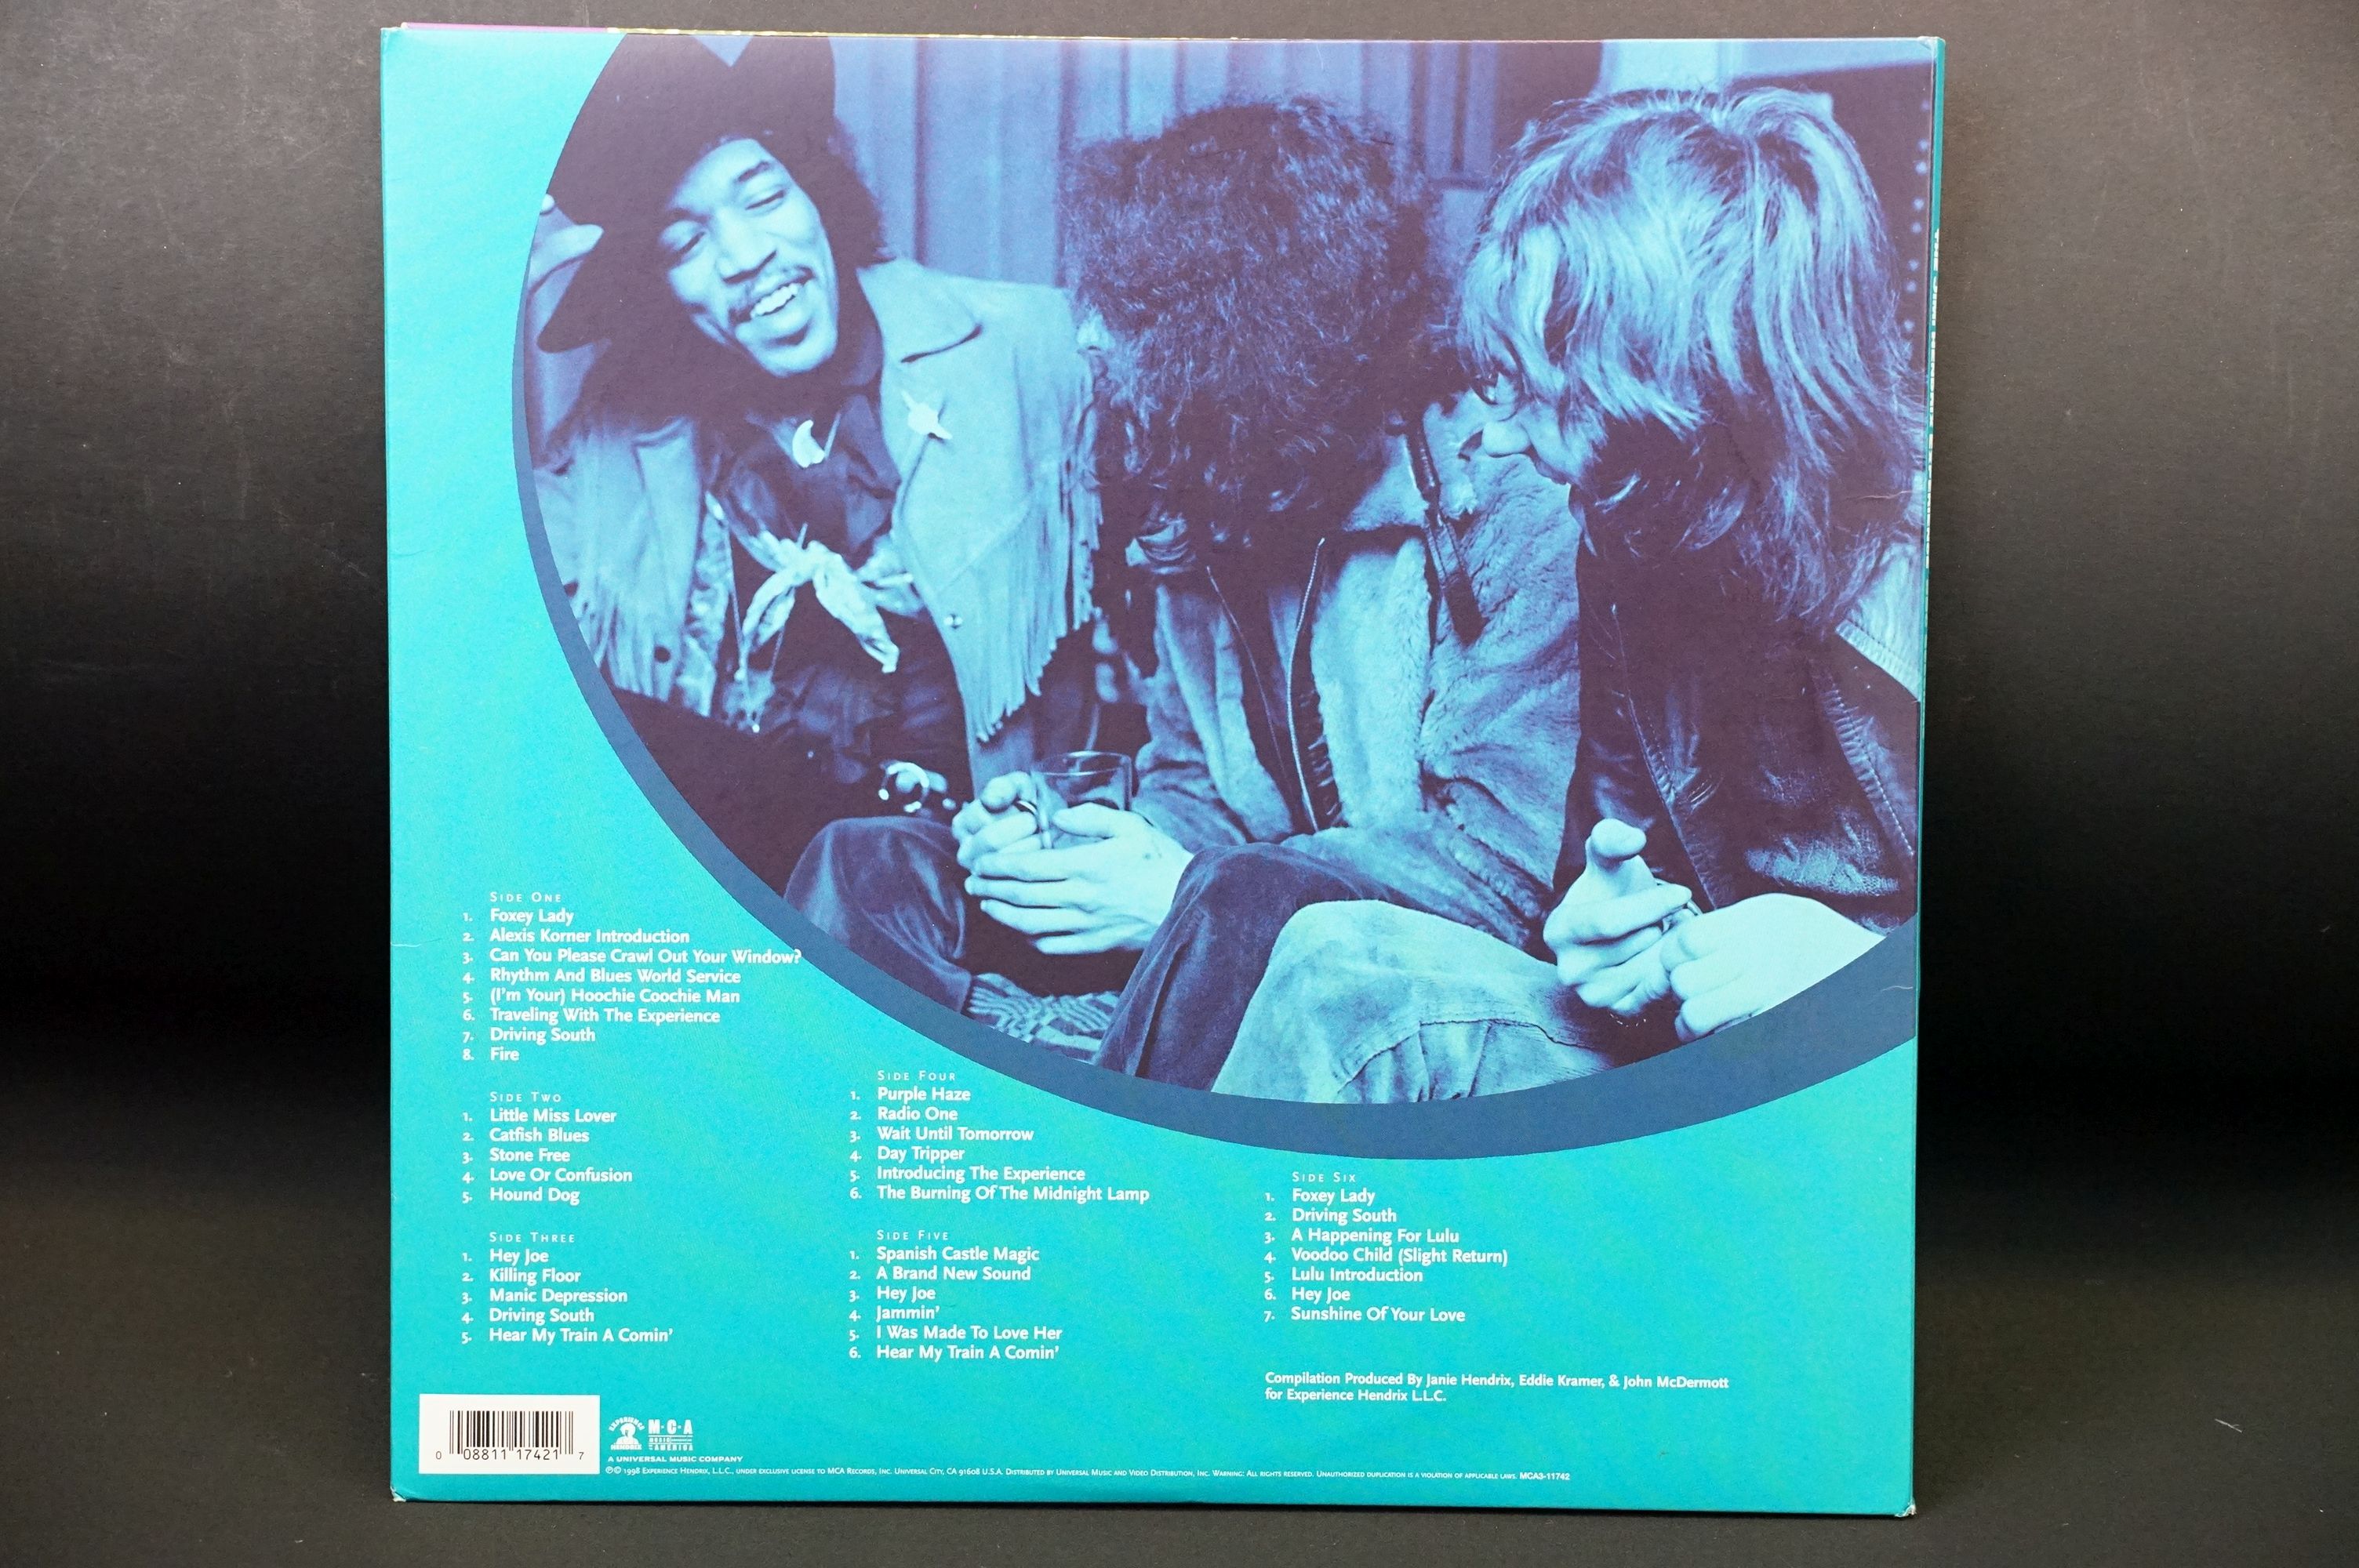 Vinyl - 2 limited edition albums by The Jimi Hendrix Experience to include: Radio One (UK 1989 - Image 9 of 15